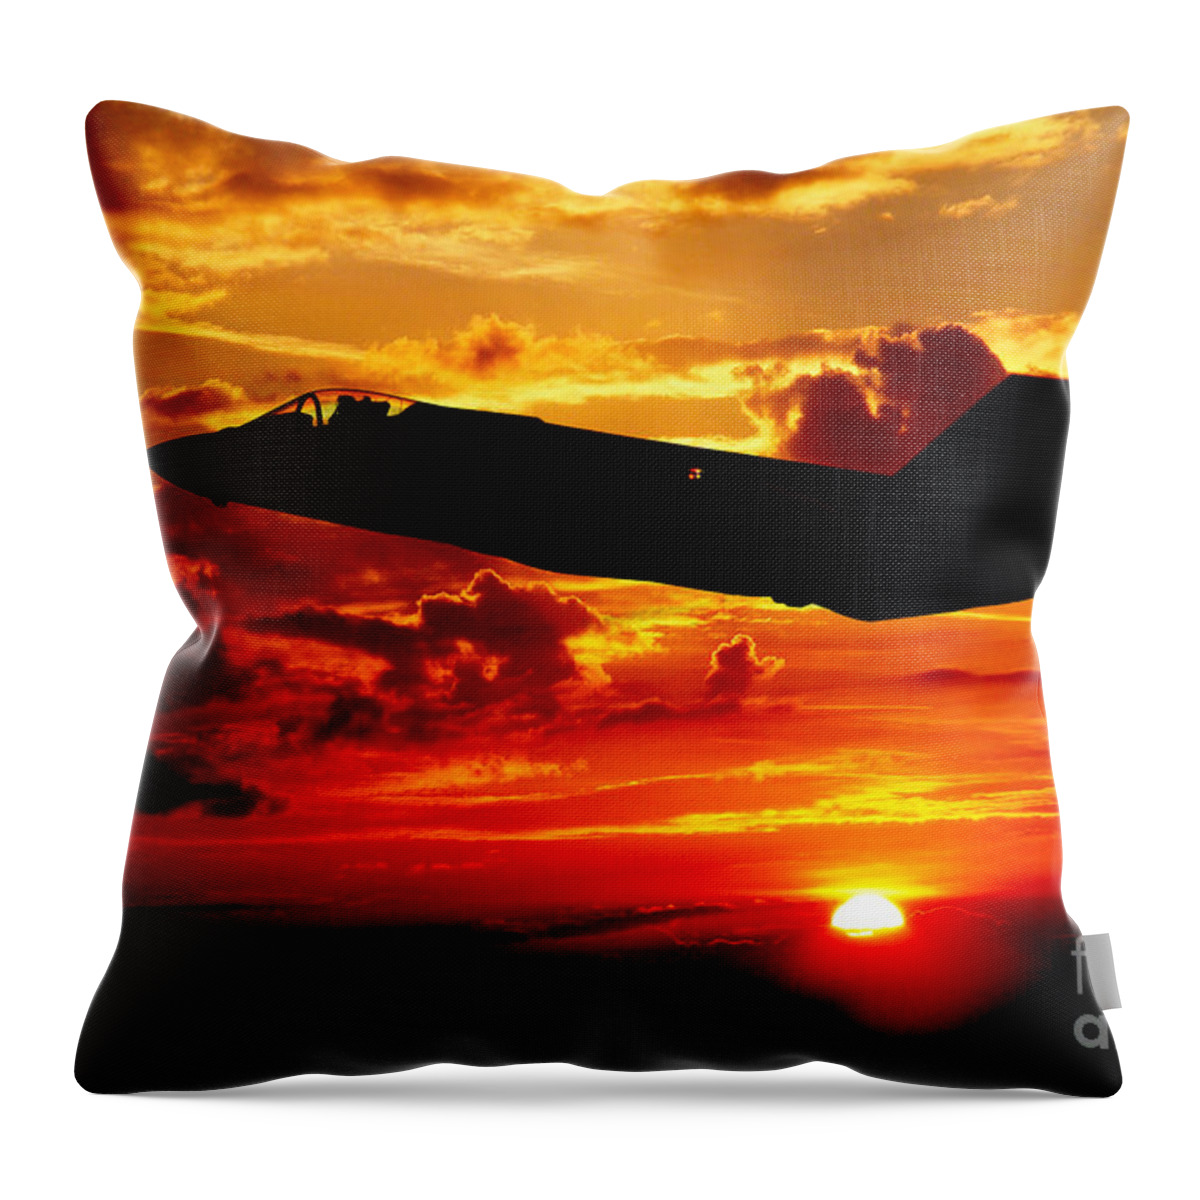 F35 Throw Pillow featuring the digital art The New Breed by Airpower Art